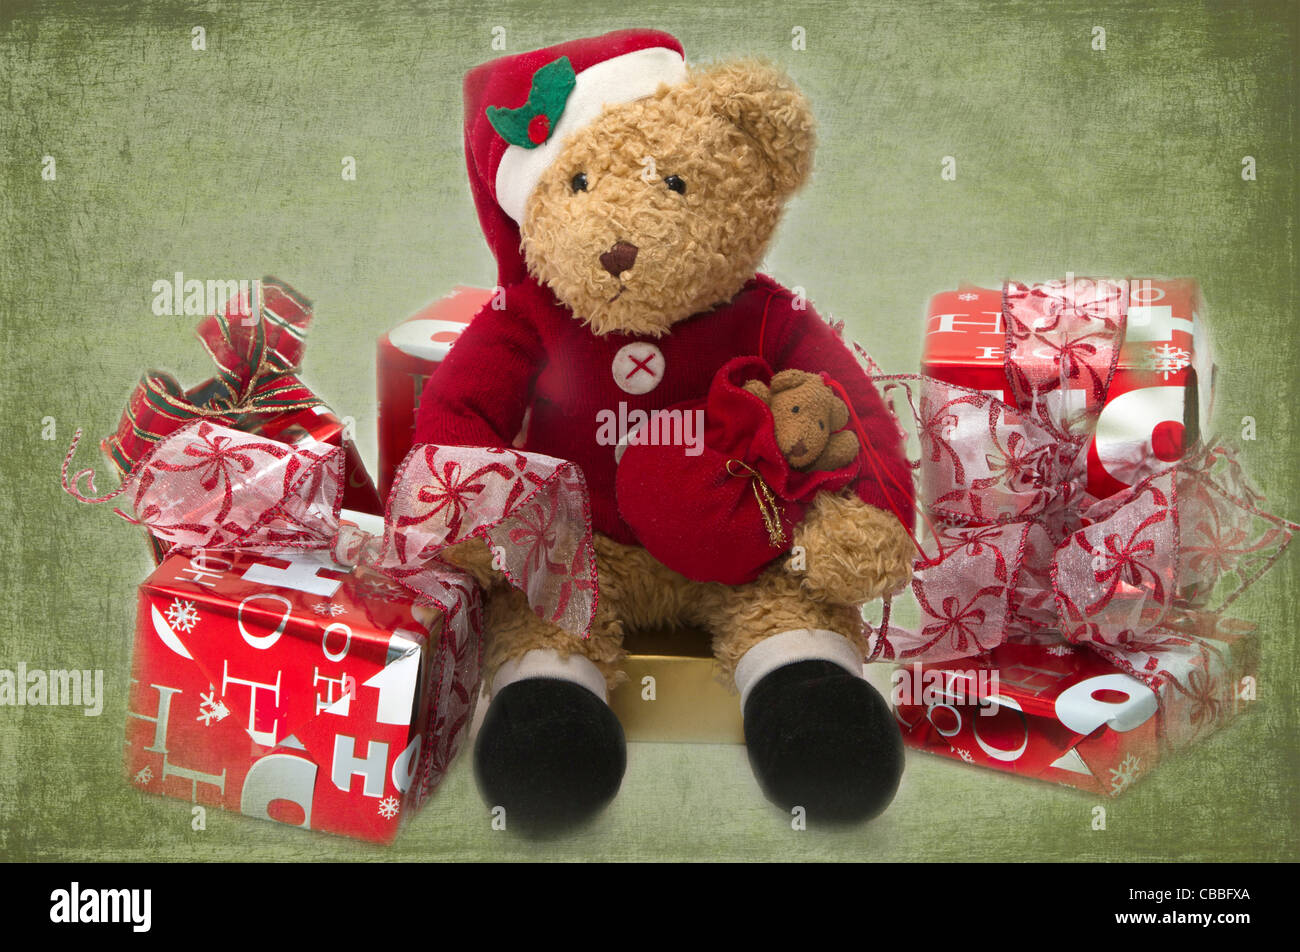 Teddy at Christmas. Well loved child's teddy dressed as Santa sitting among presents. Stock Photo